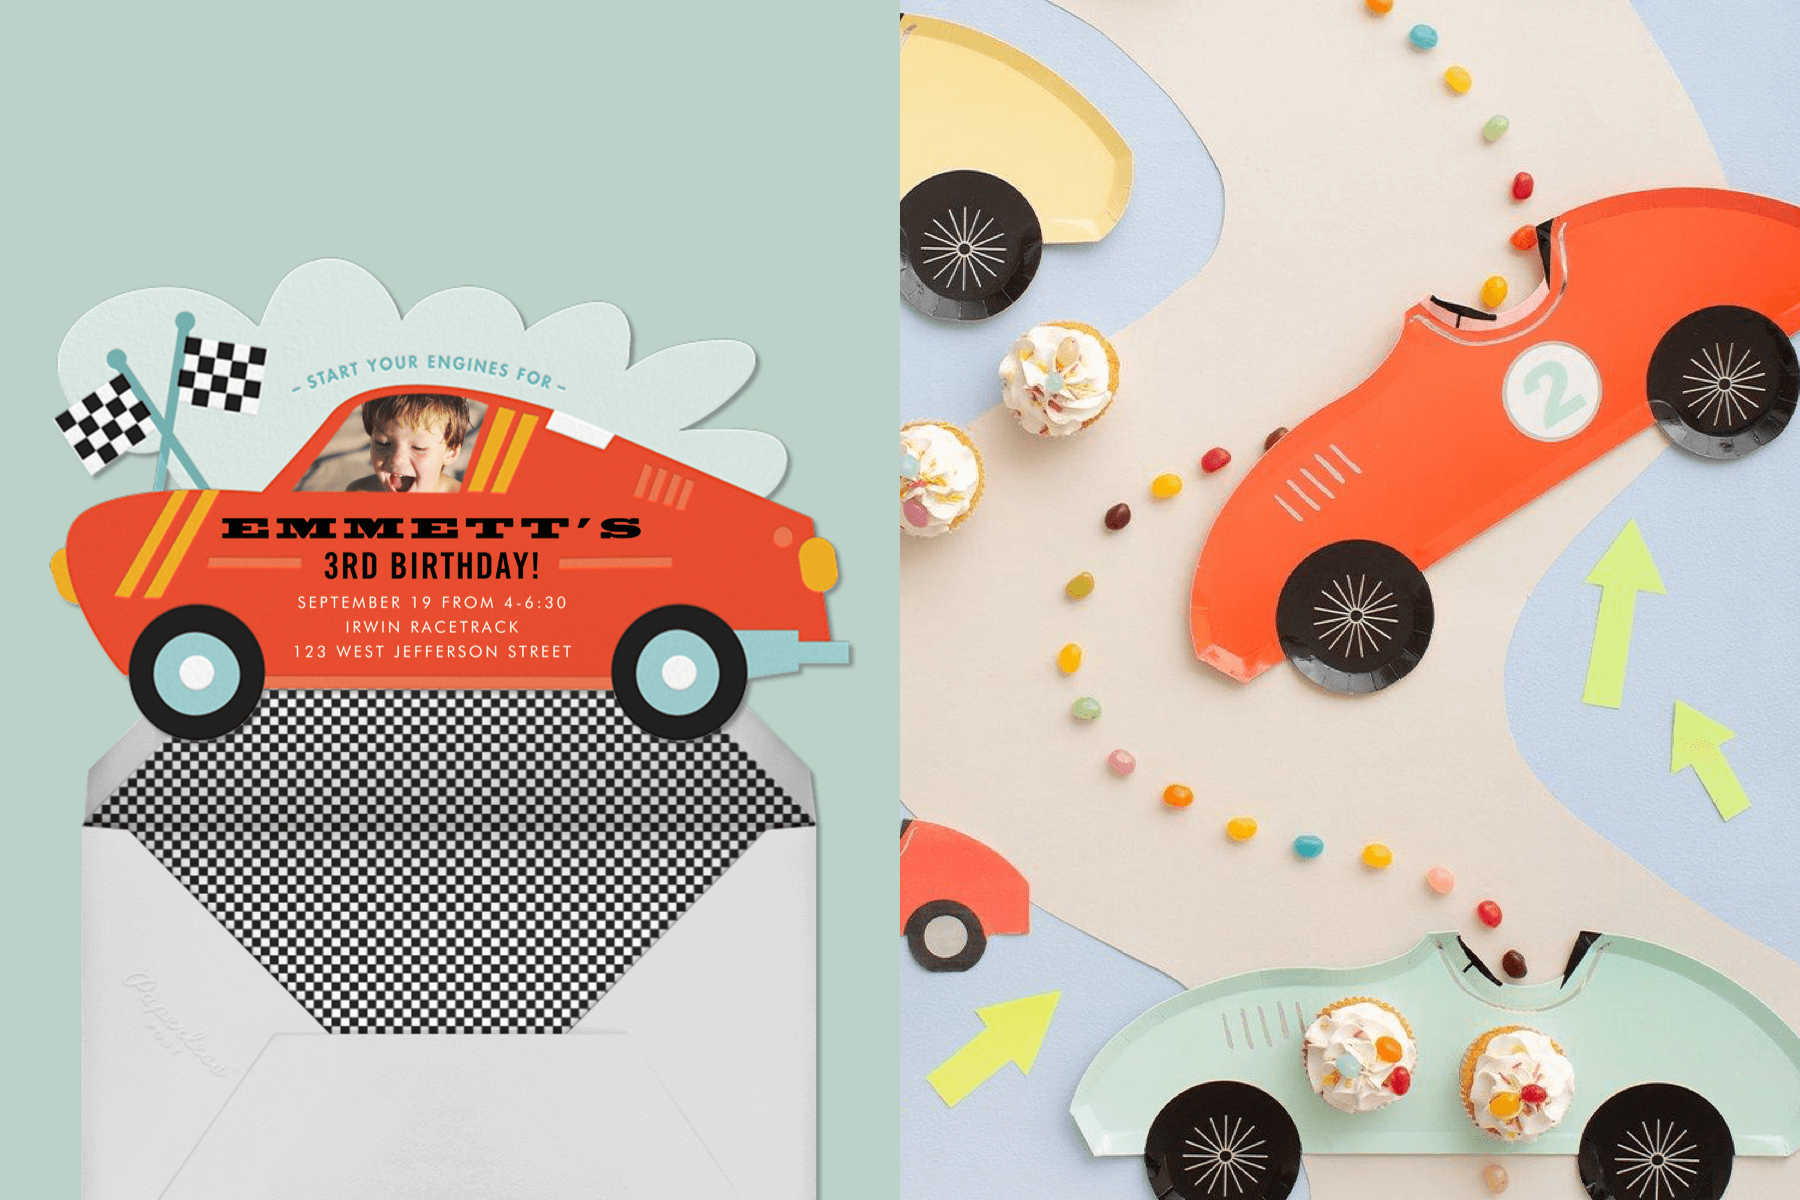 left: A red race car-shaped birthday invitation. Right: Race car-shaped party plates. 